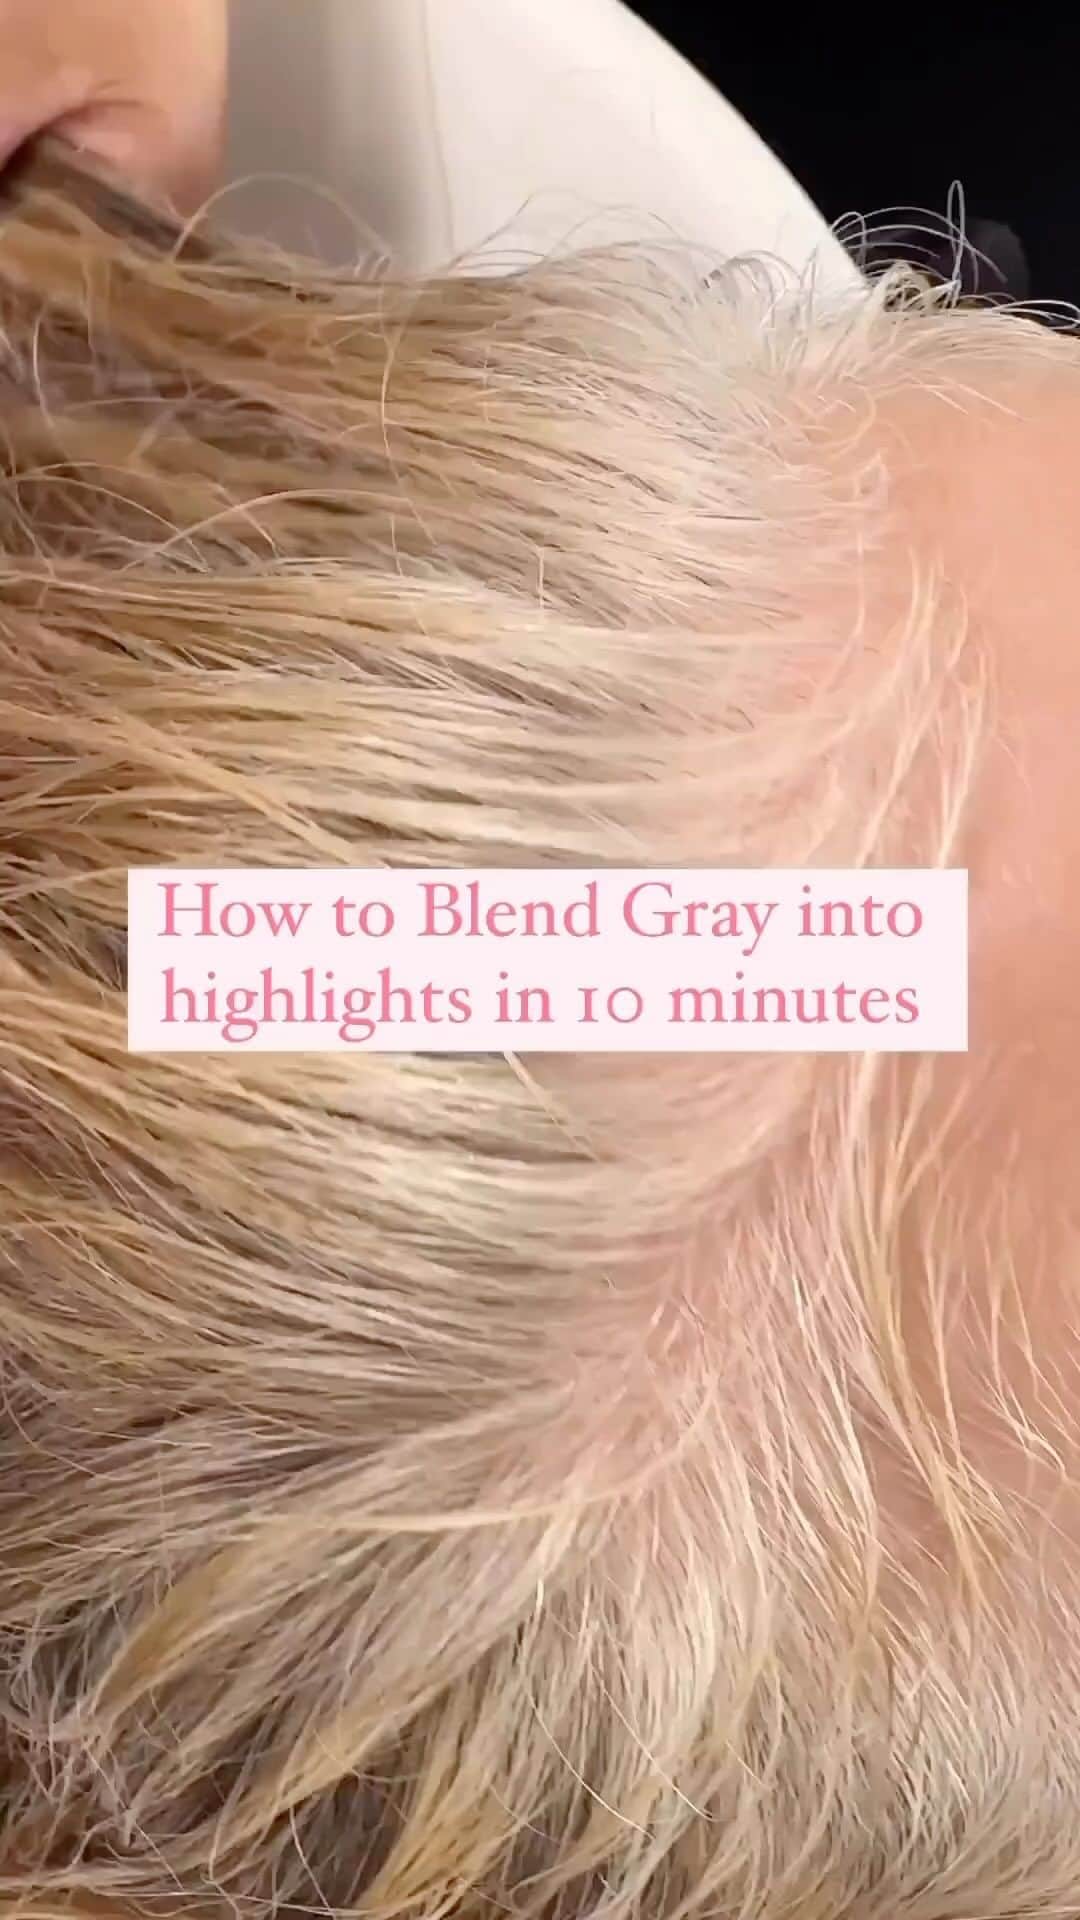 CosmoProf Beautyのインスタグラム：「Seamless gray blending tips with @mirellamanelli using @KenraProfessional.   CHECK OUT HER #KenraColor FORMULA! 👇🏽 ► Chunky Highlight Formula: Simply Blonde Ultra Lift Ice + Ultra Lift Natural + 40Vol ► Toner Formula: Studio Stylist Express 10N + 9G Perm + 30Vol ► Ending Formula: GV Rapid Toner Demi + 9Vol  Did you like the final look? Do you cover grays or would you blend them if you could?  Cosmo Prof is here to support your artistry. Visit us in-store or online at www.CosmoProfBeauty.com to shop the Kenra Professional line.   #CosmoProf #KenraProfessional #HairEducation #BehindTheChair #GrayCoverage #StylistHacks #SalonTips #HairEducator #HairClass #SalonEducation」